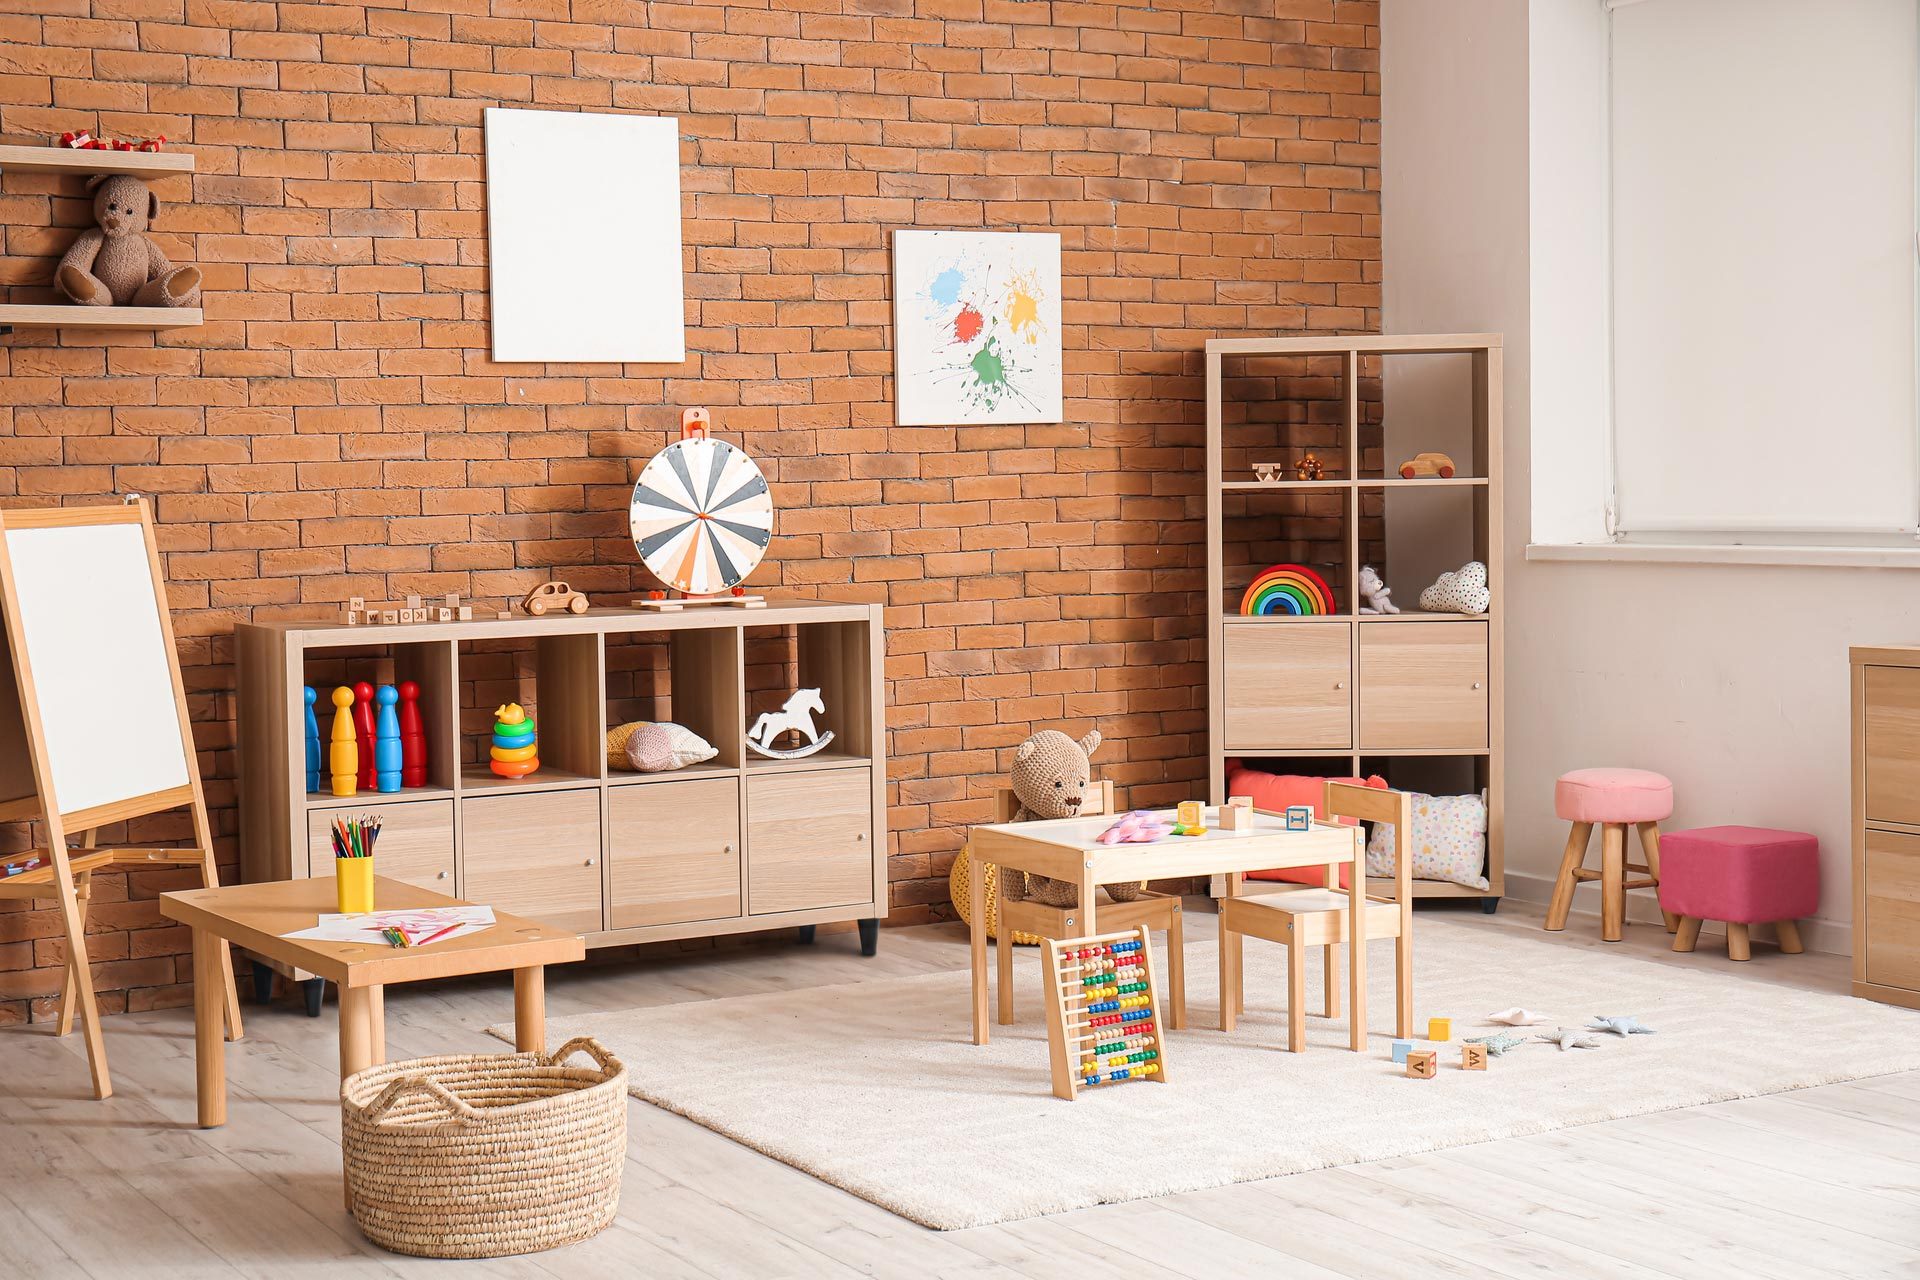 A kid’s playroom with toys and natural wood furniture